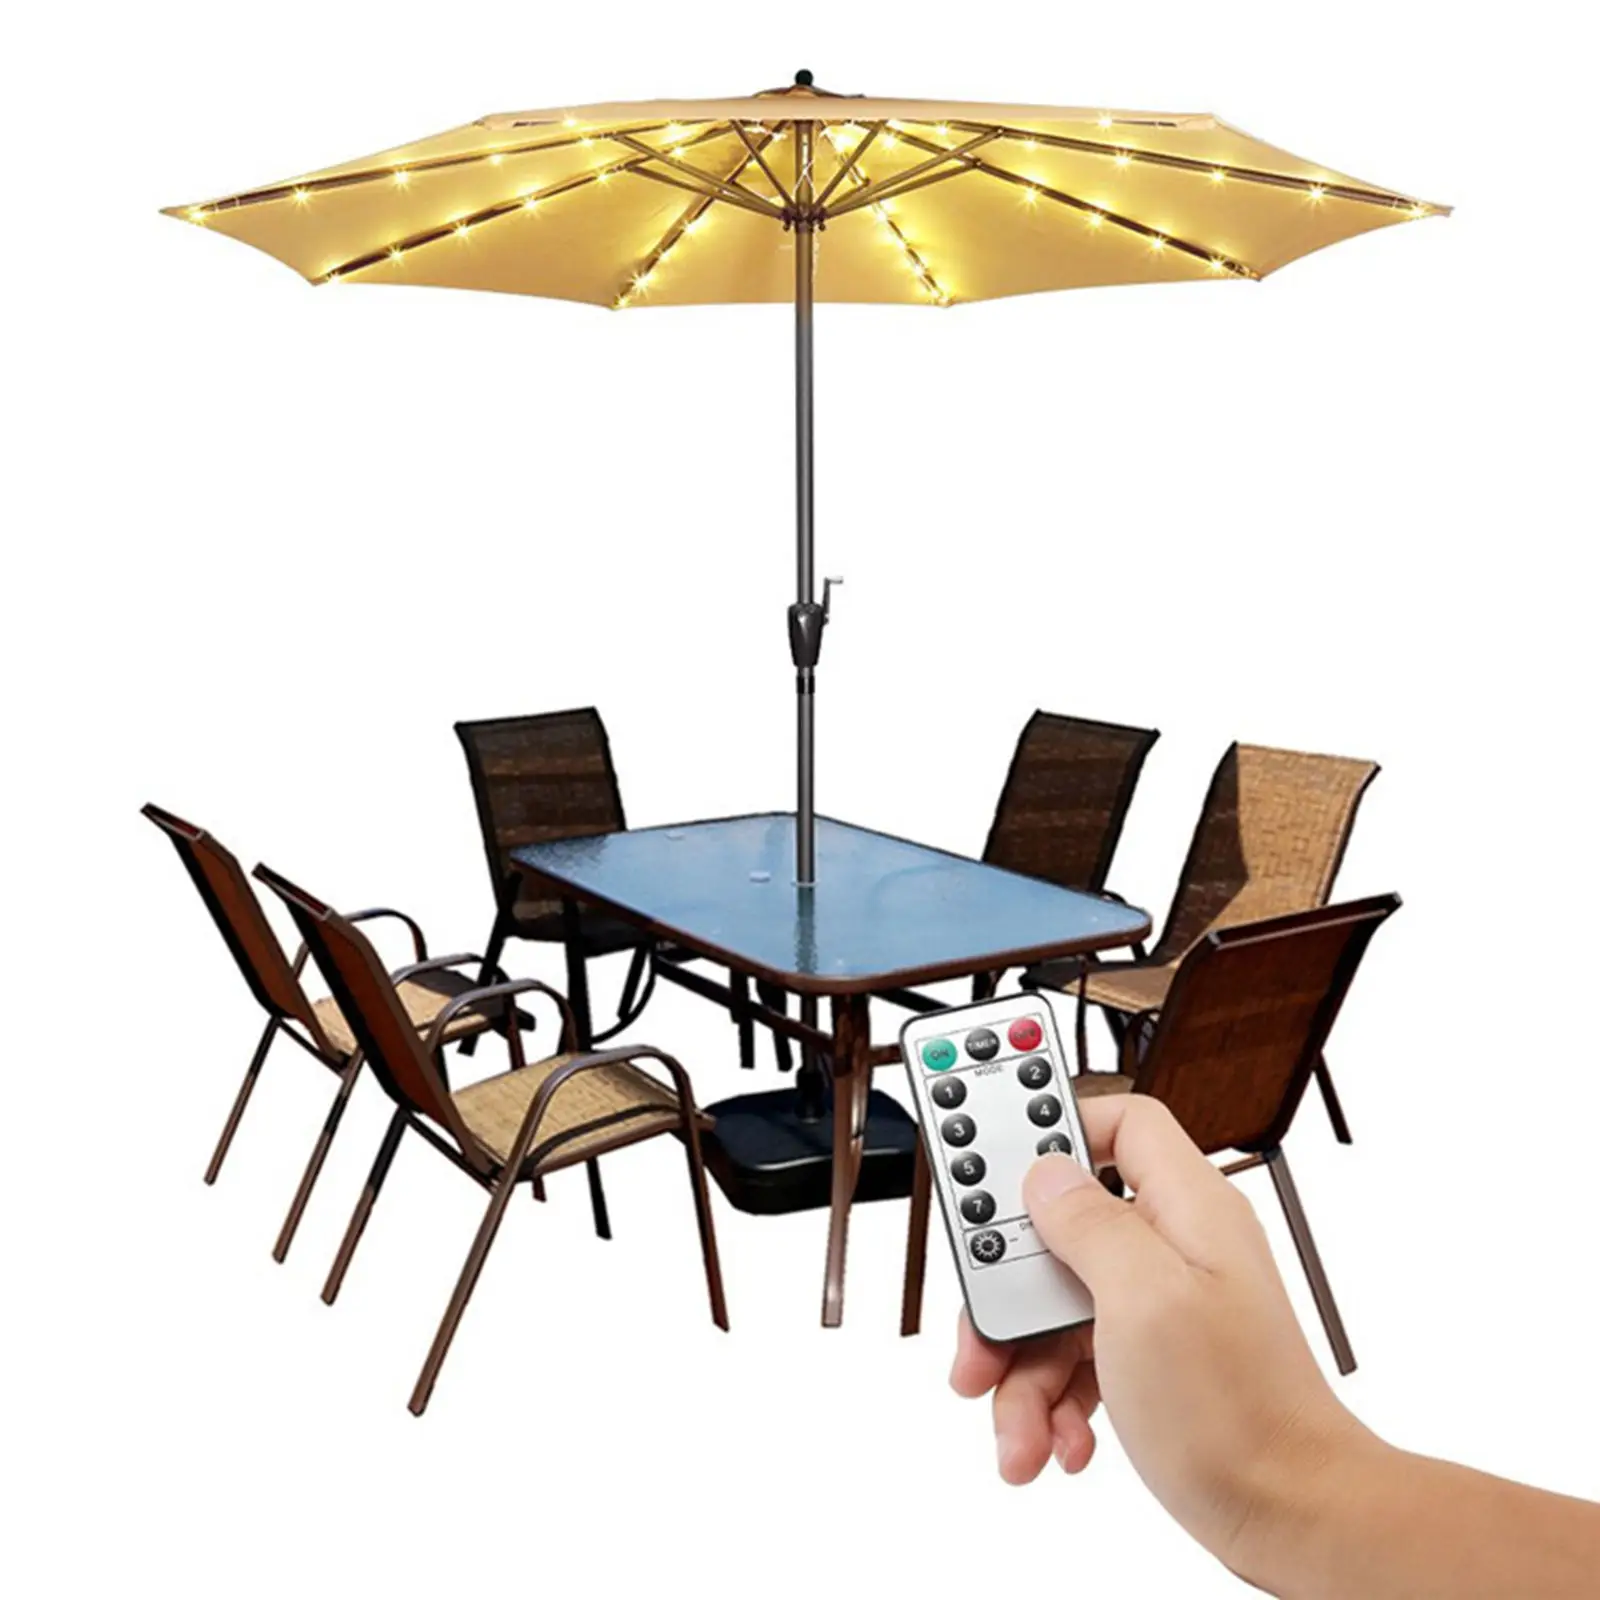 Patio Umbrella Parasol Lights 104LEDs Battery Operated 8 Lighting Mode Waterproof Tent String Light & Remote Control Decoration